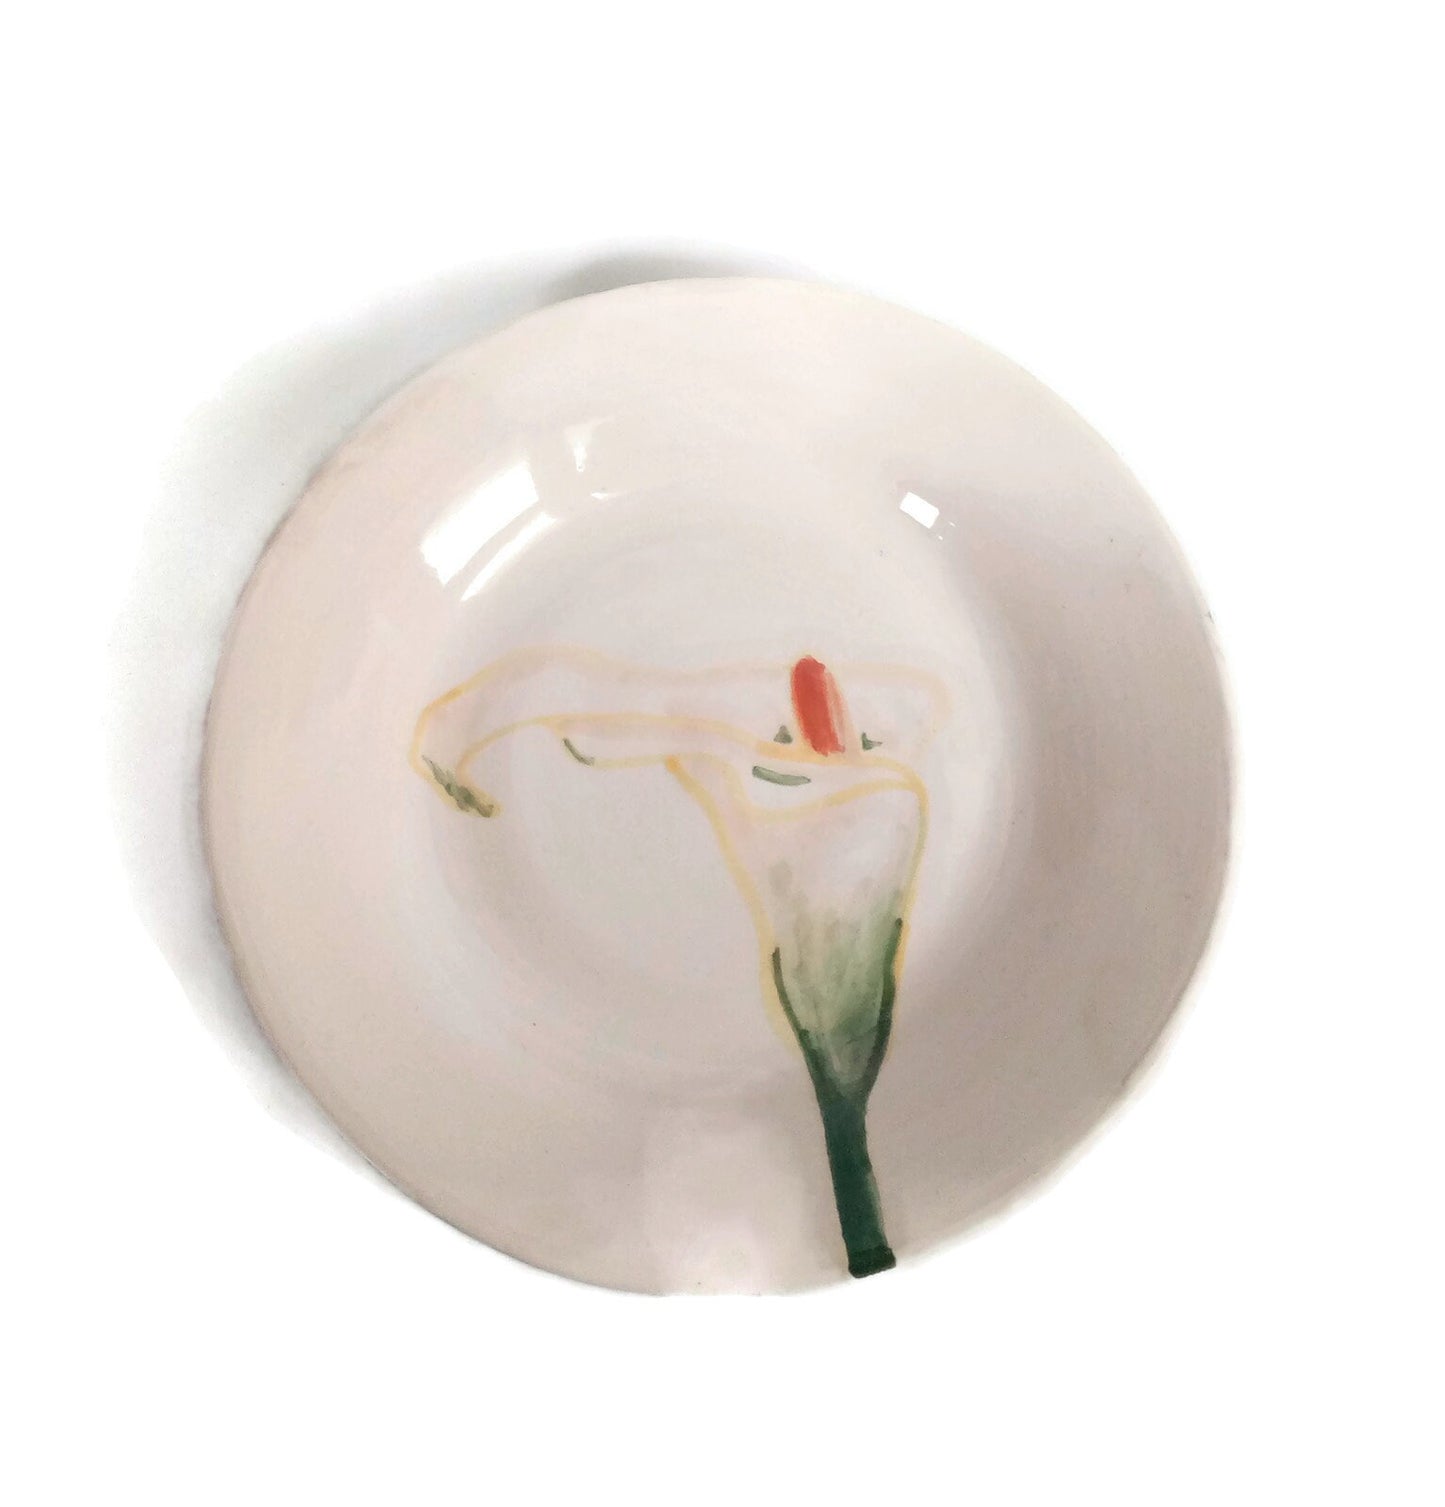 Handmade Ceramic Plate With Unique Hand Painted Calla Lily, Serving Dish, Artisan Portuguese Round Dinner Plate Wall Decor For Display - Ceramica Ana Rafael